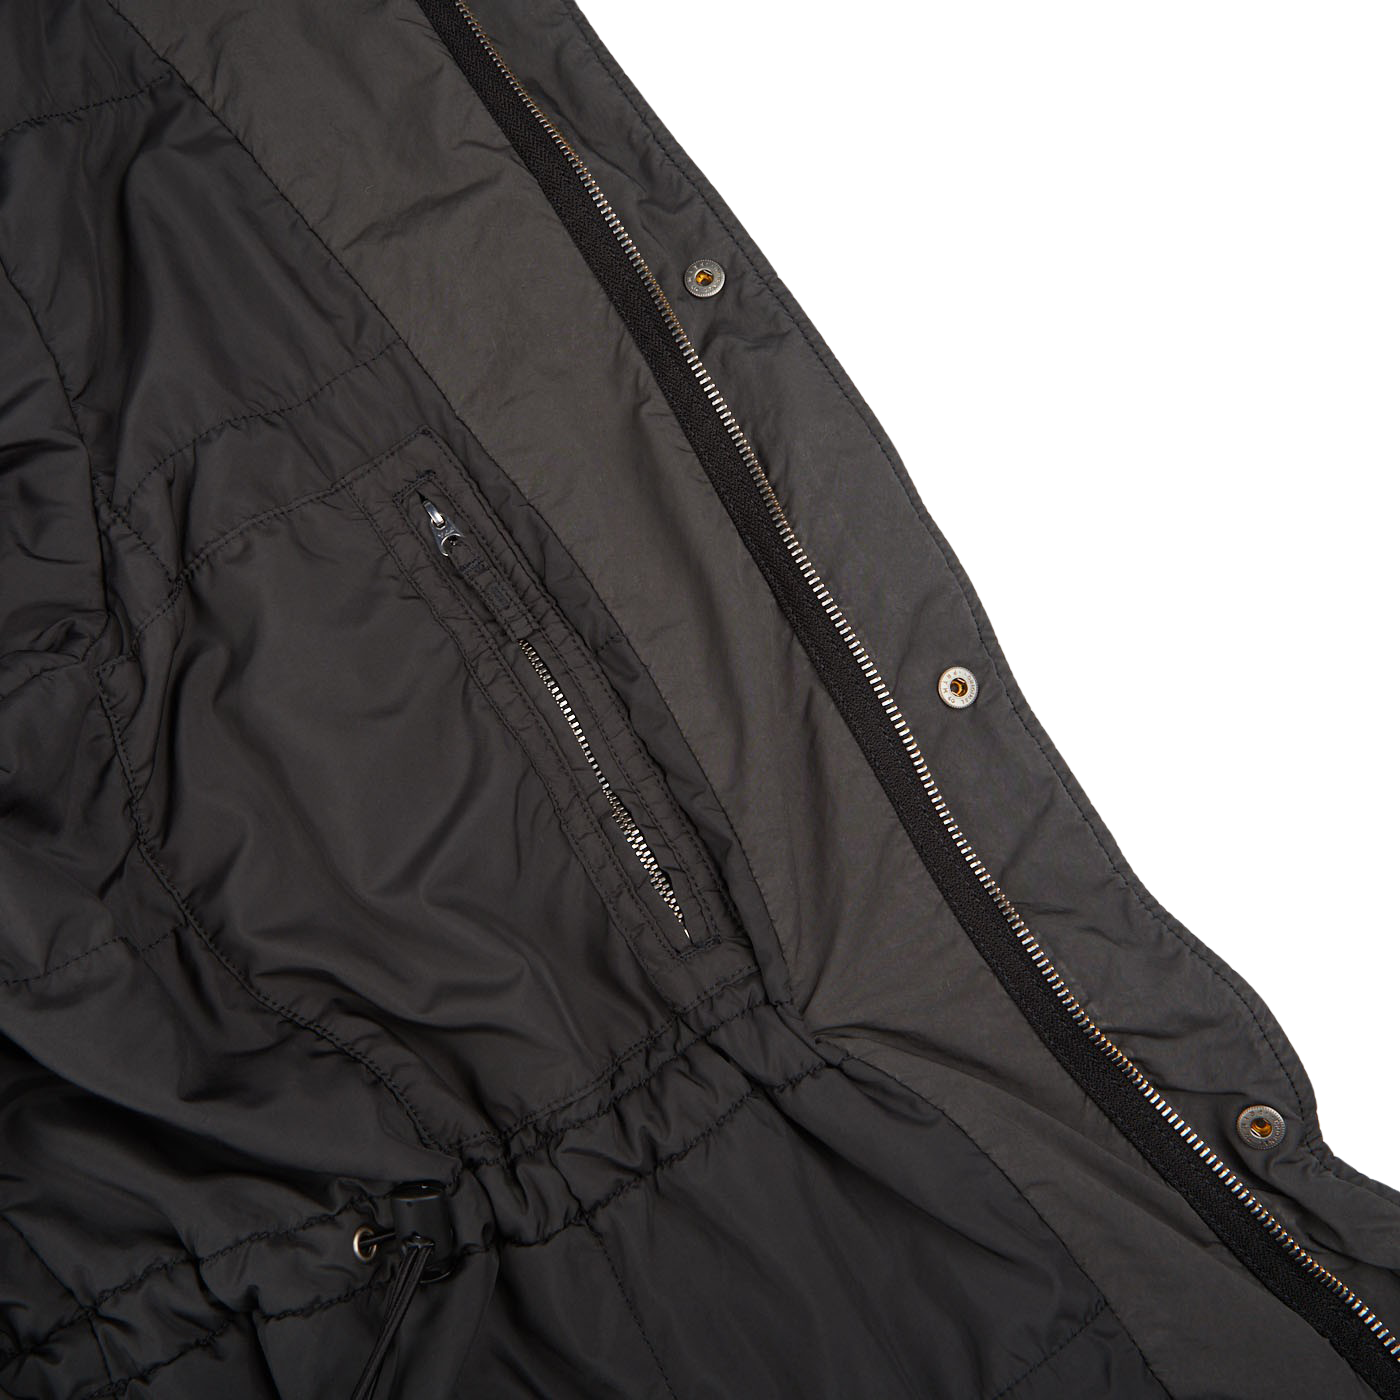 A close up of a grey Aspesi Luxury Nylon Padded Field Jacket on a white surface.